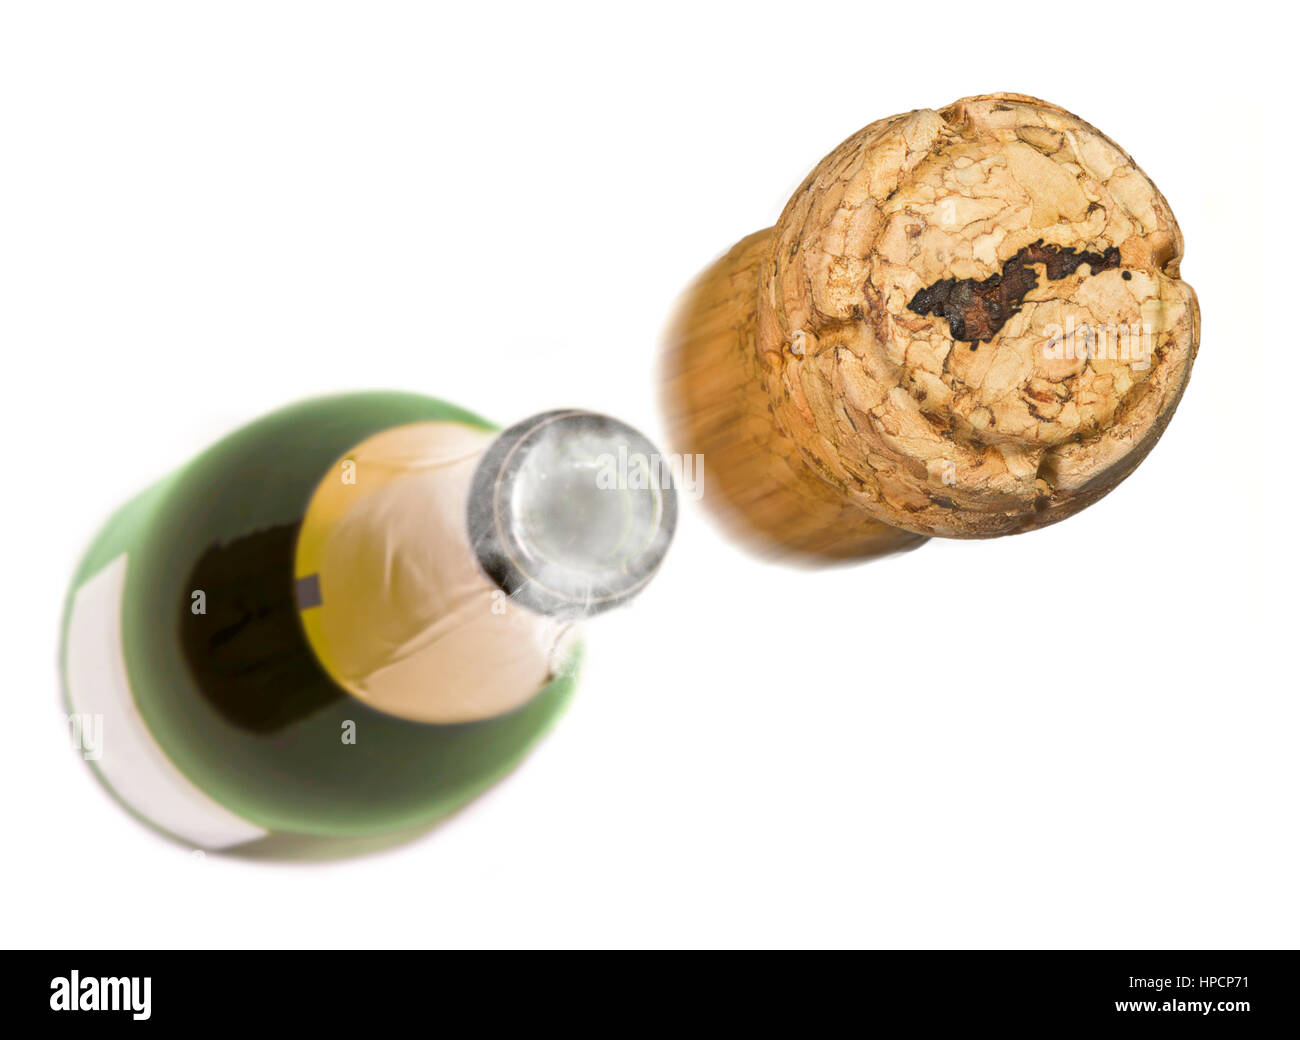 Champagne cork with the shape of American Samoa burnt in and bottle of champagne in the back.(series) Stock Photo